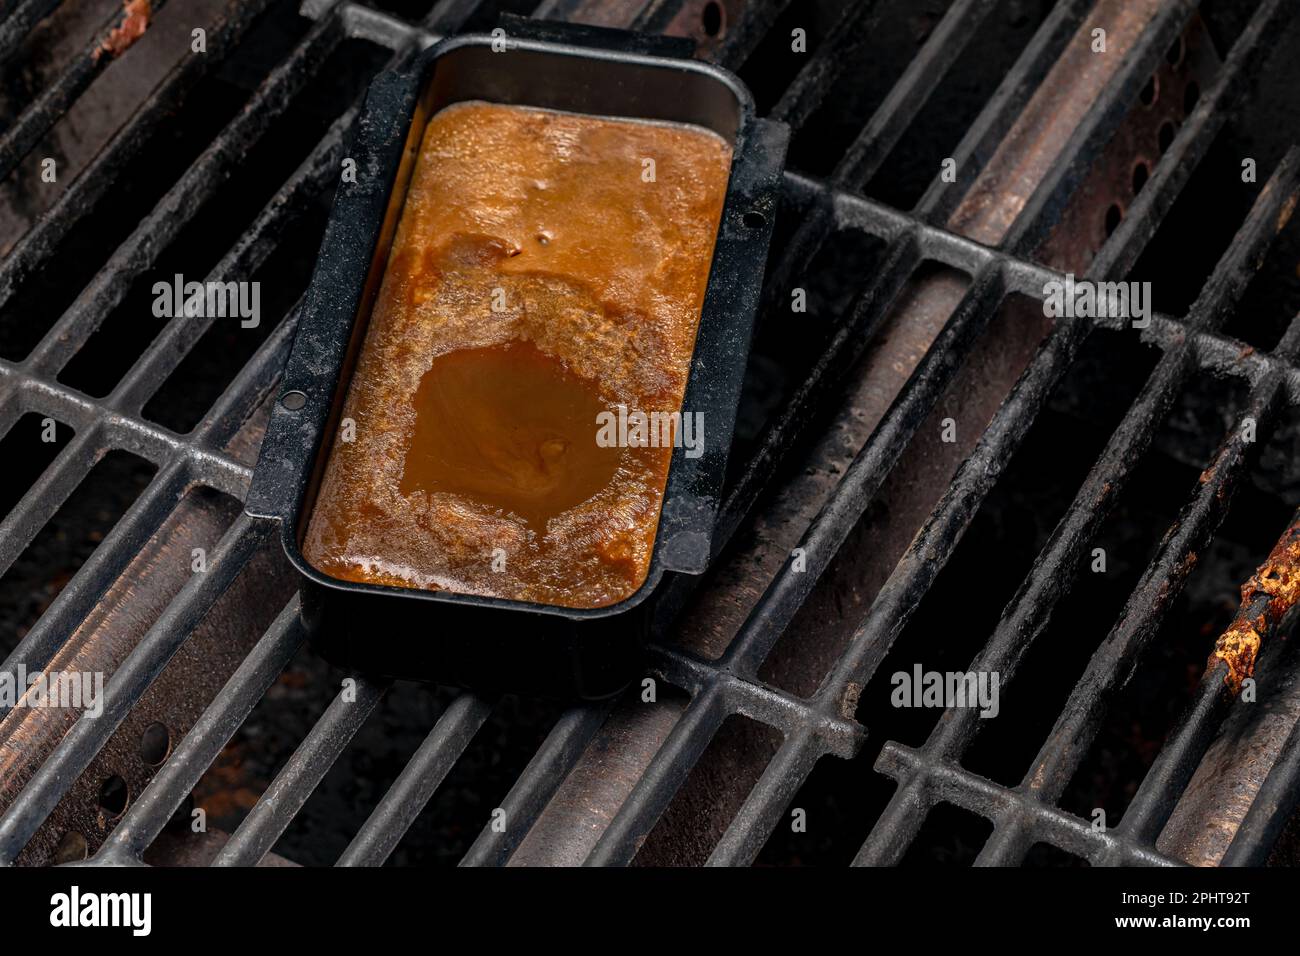 BBQ grill drip pan full of grease and fat. Barbeque grilling, cleaning and food safety concept. Stock Photo